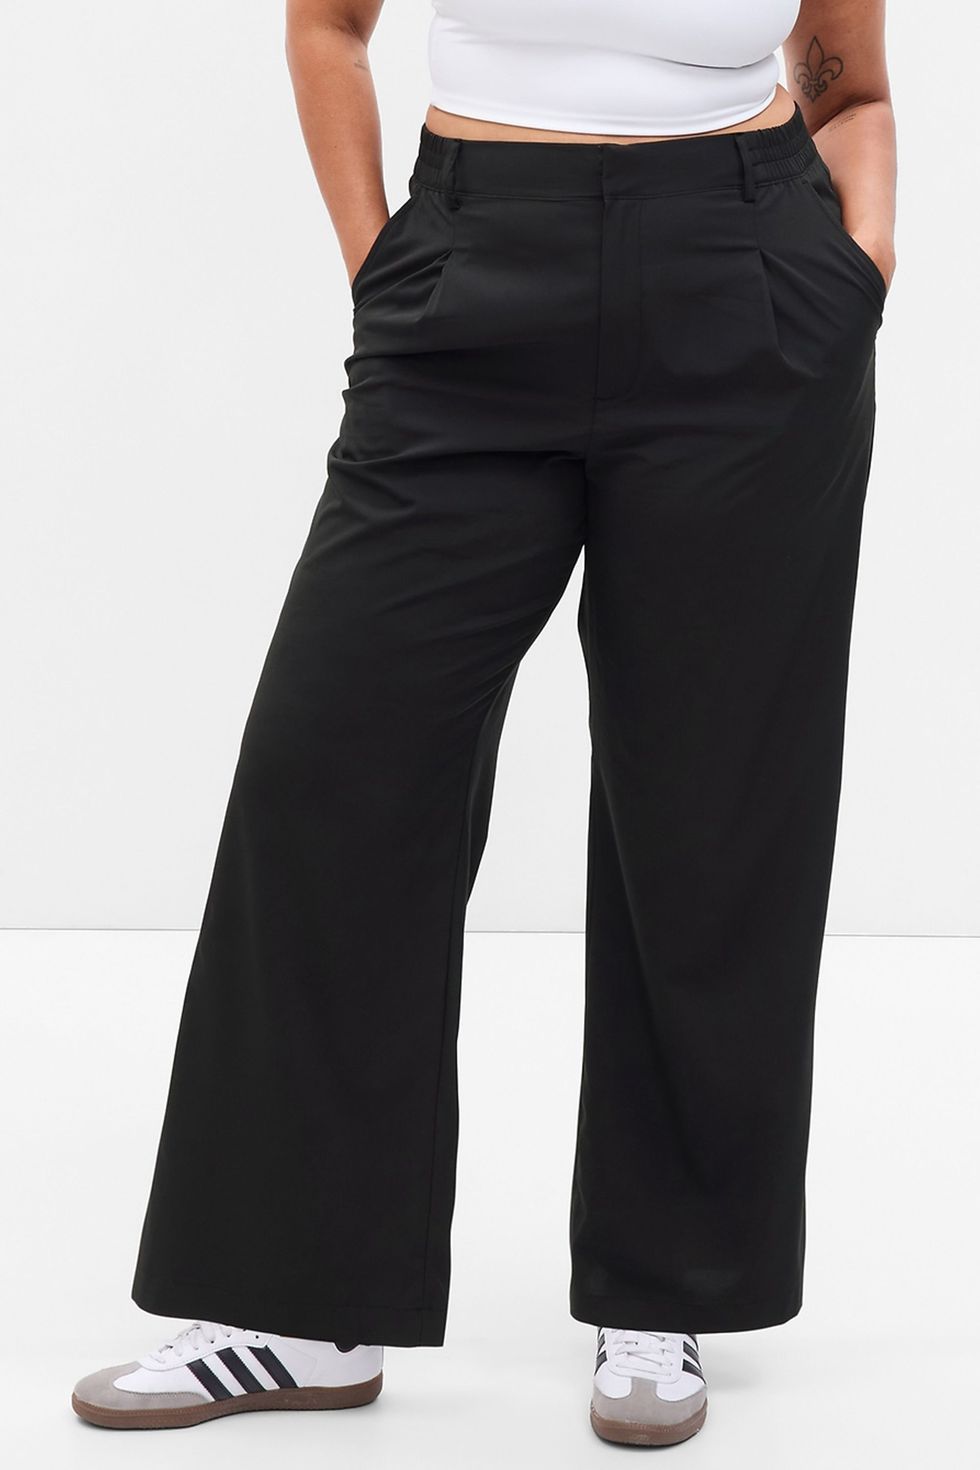 Green Home Business Trousers Commute Solid Color Woman